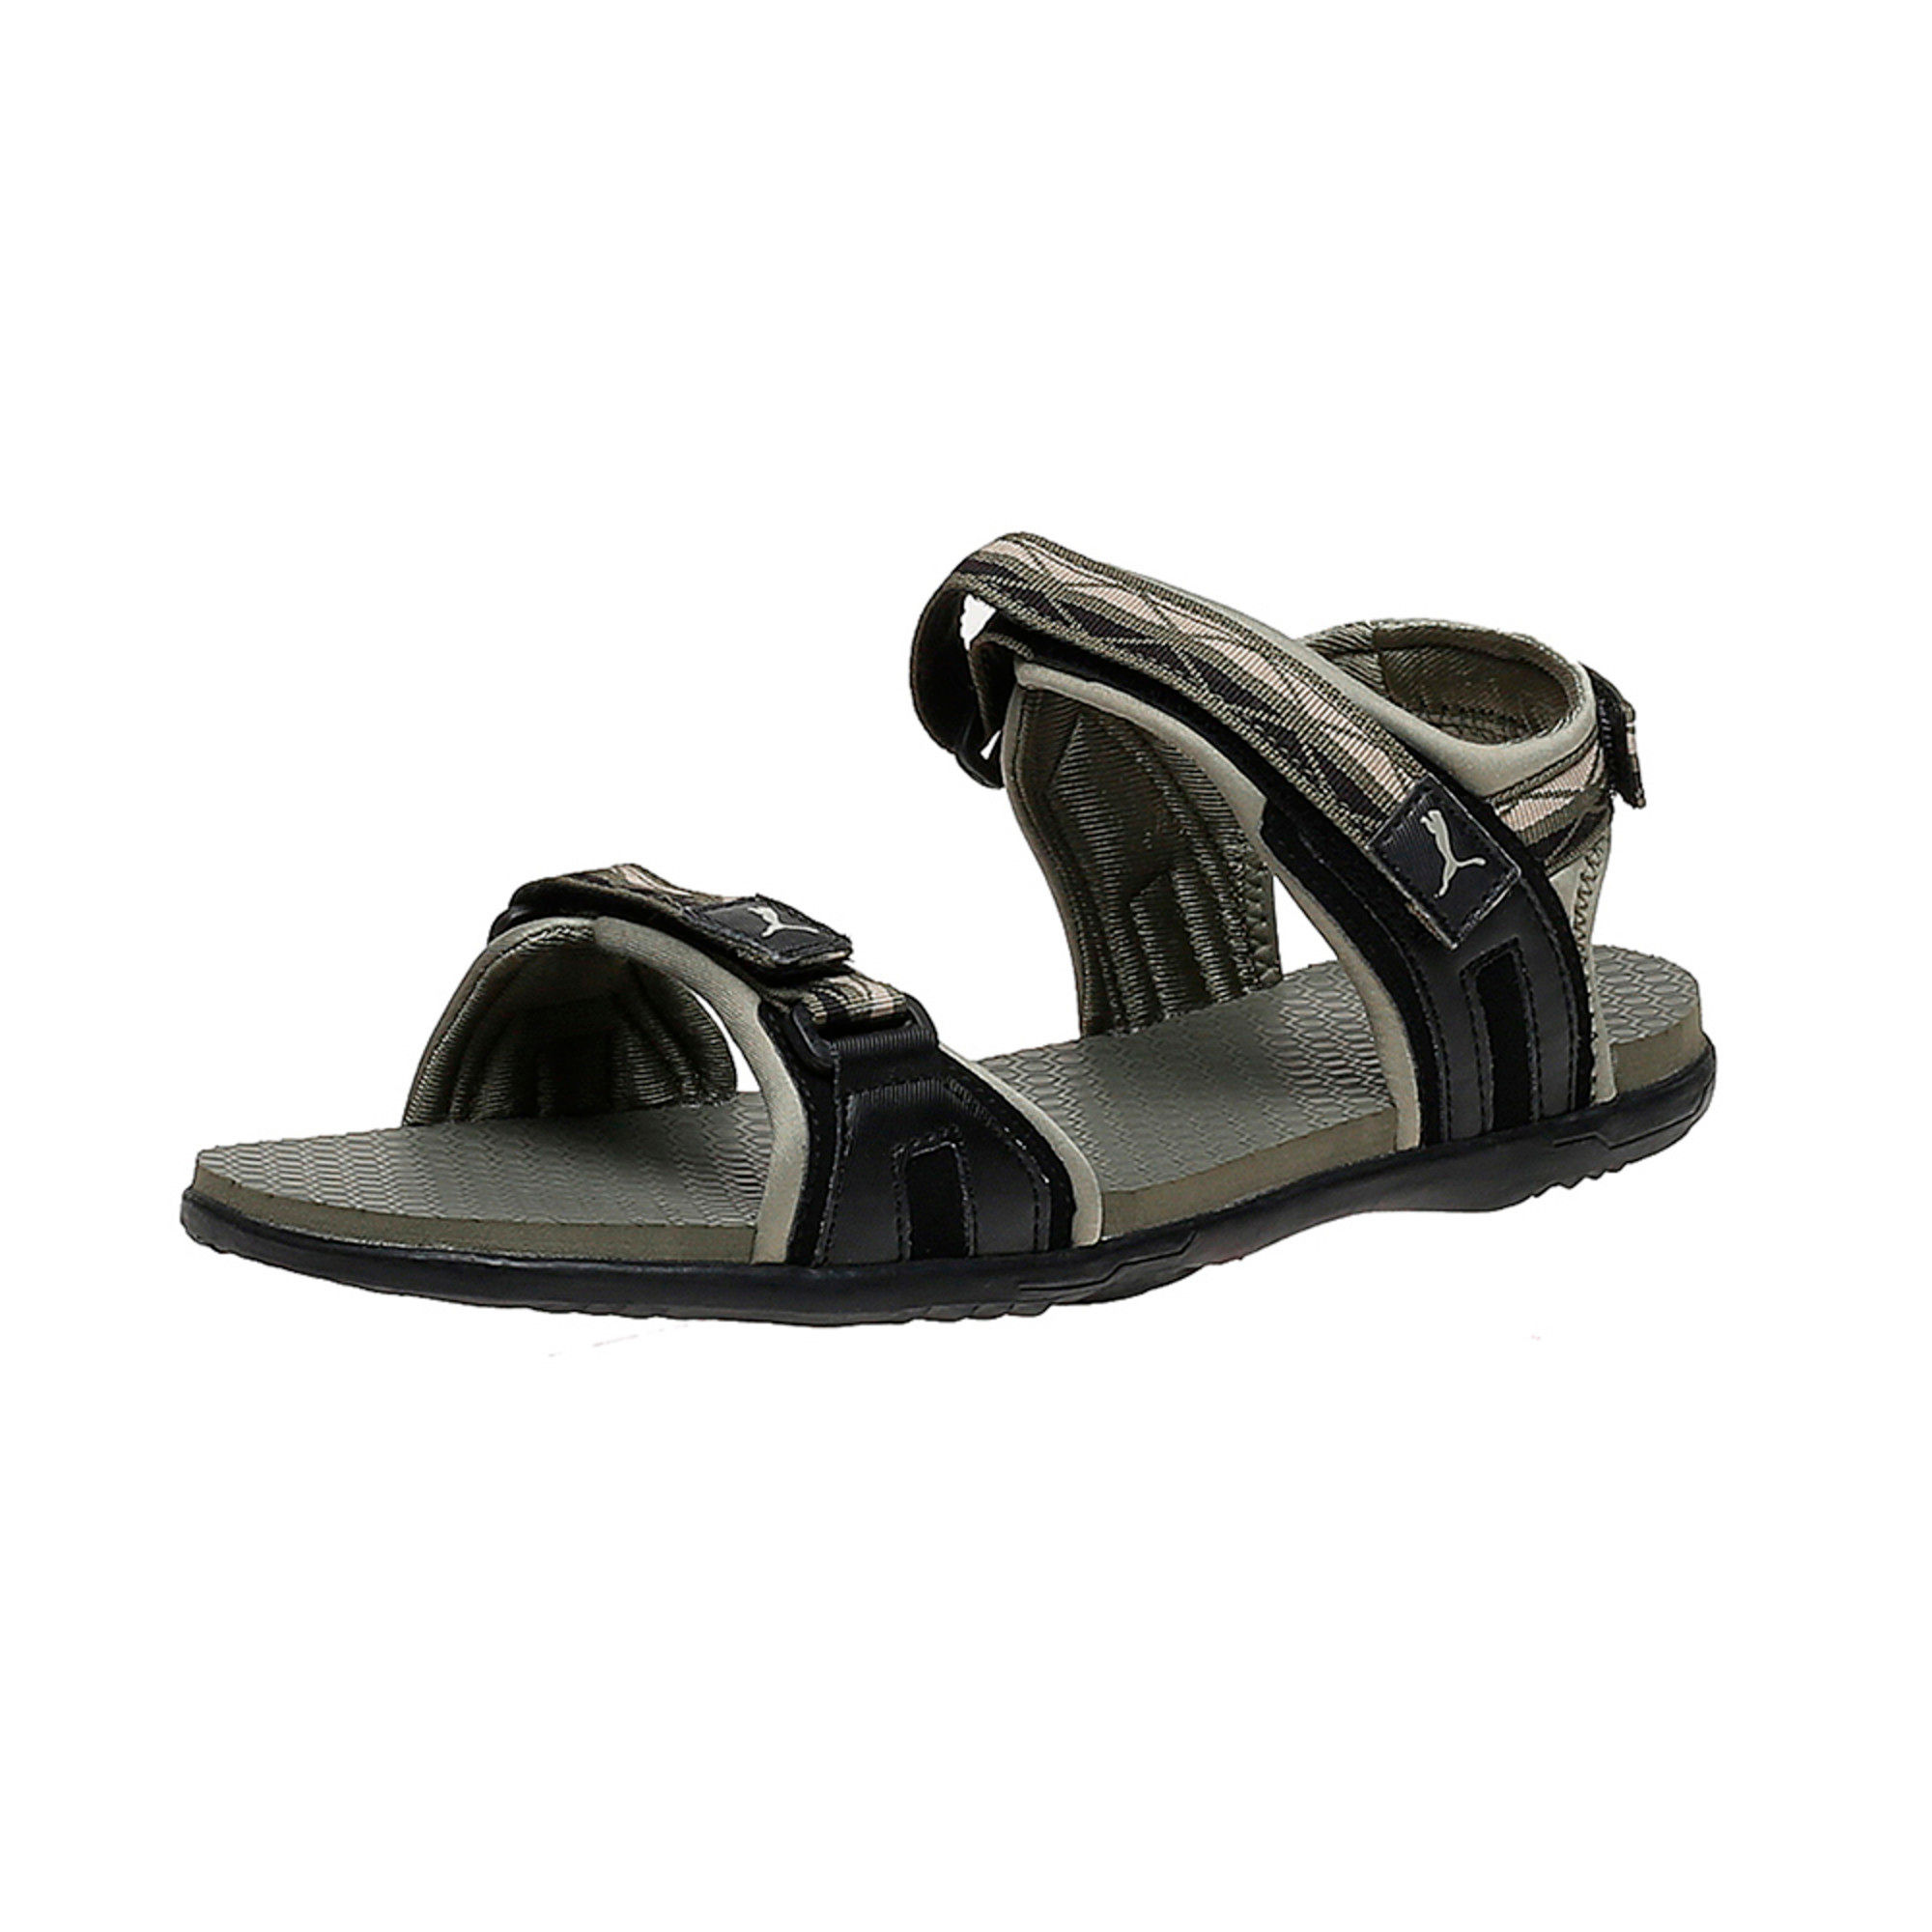 Buy Camper Women's Dana Black Leather Sandals from the Next UK online shop  | Womens sandals, Black sandals, Black leather